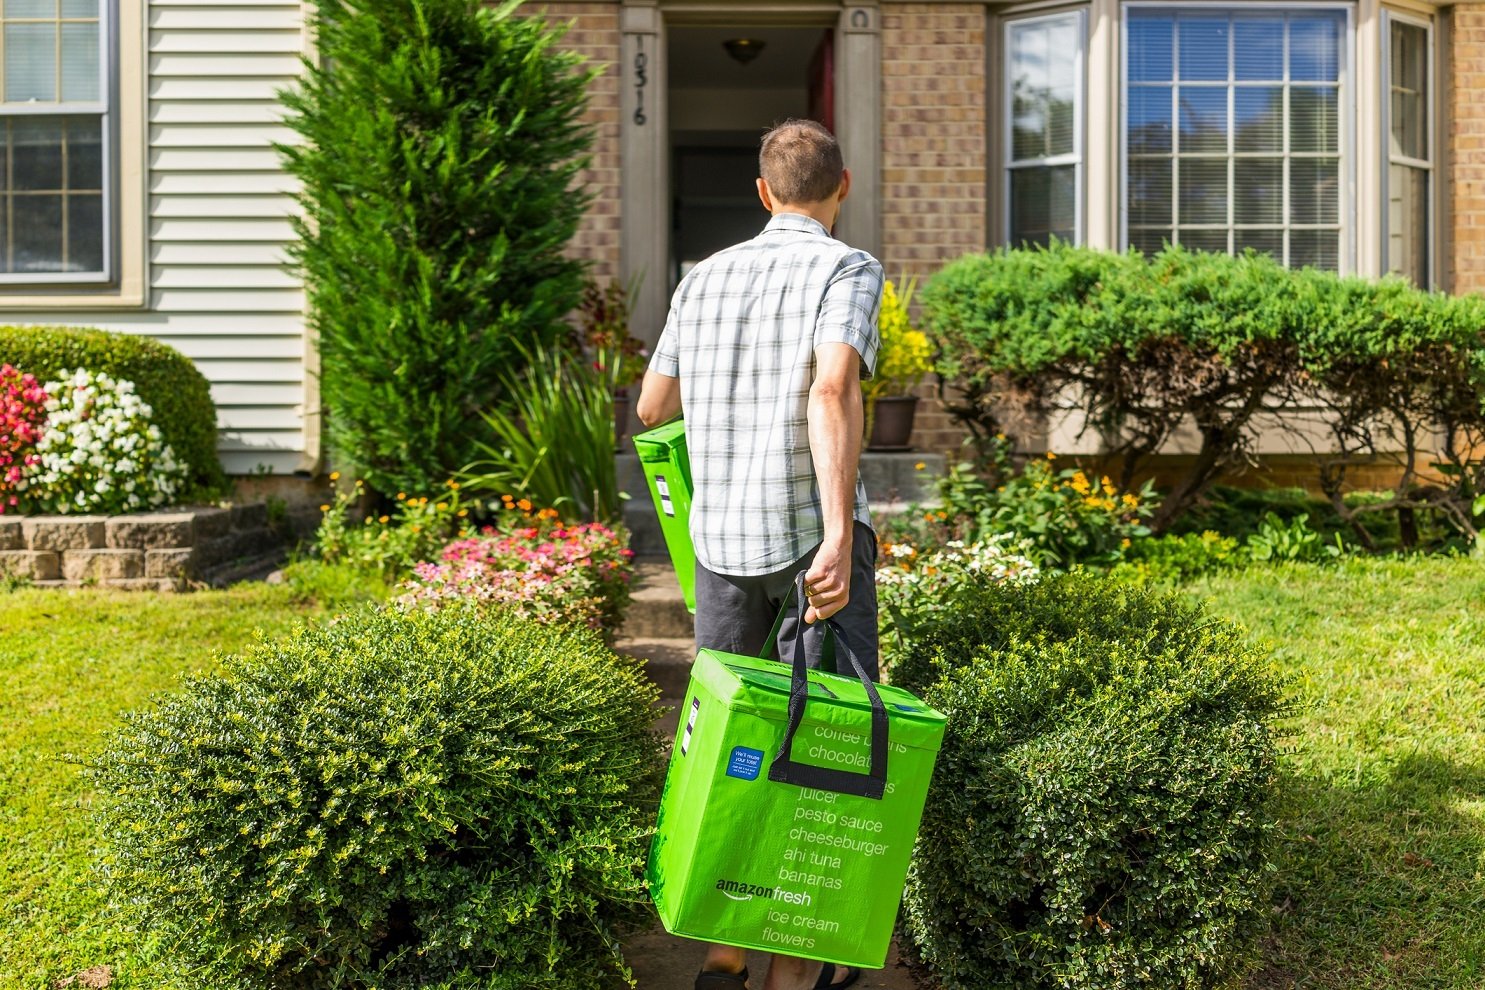 Amazon Fresh insulated grocery delivery bags totes on front home house porch closeup with man carrying